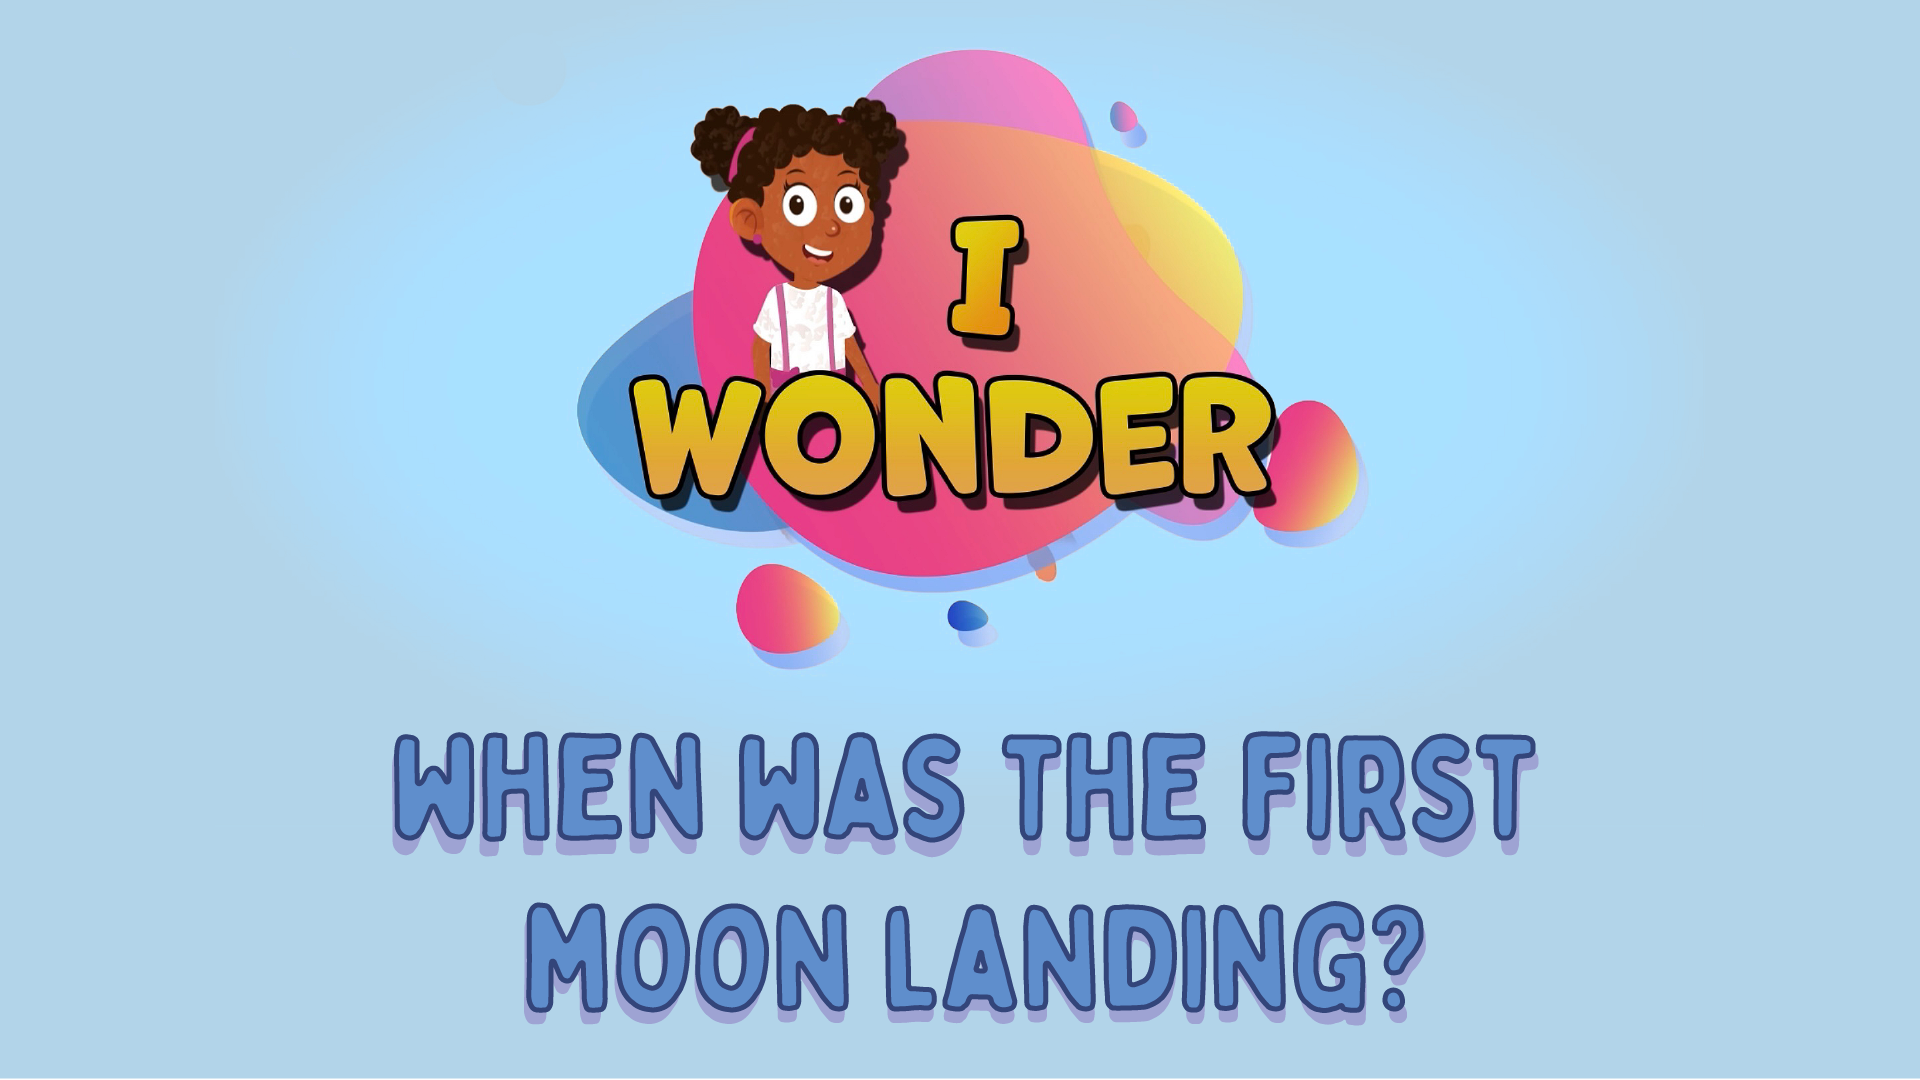 When Was The First Moon Landing?